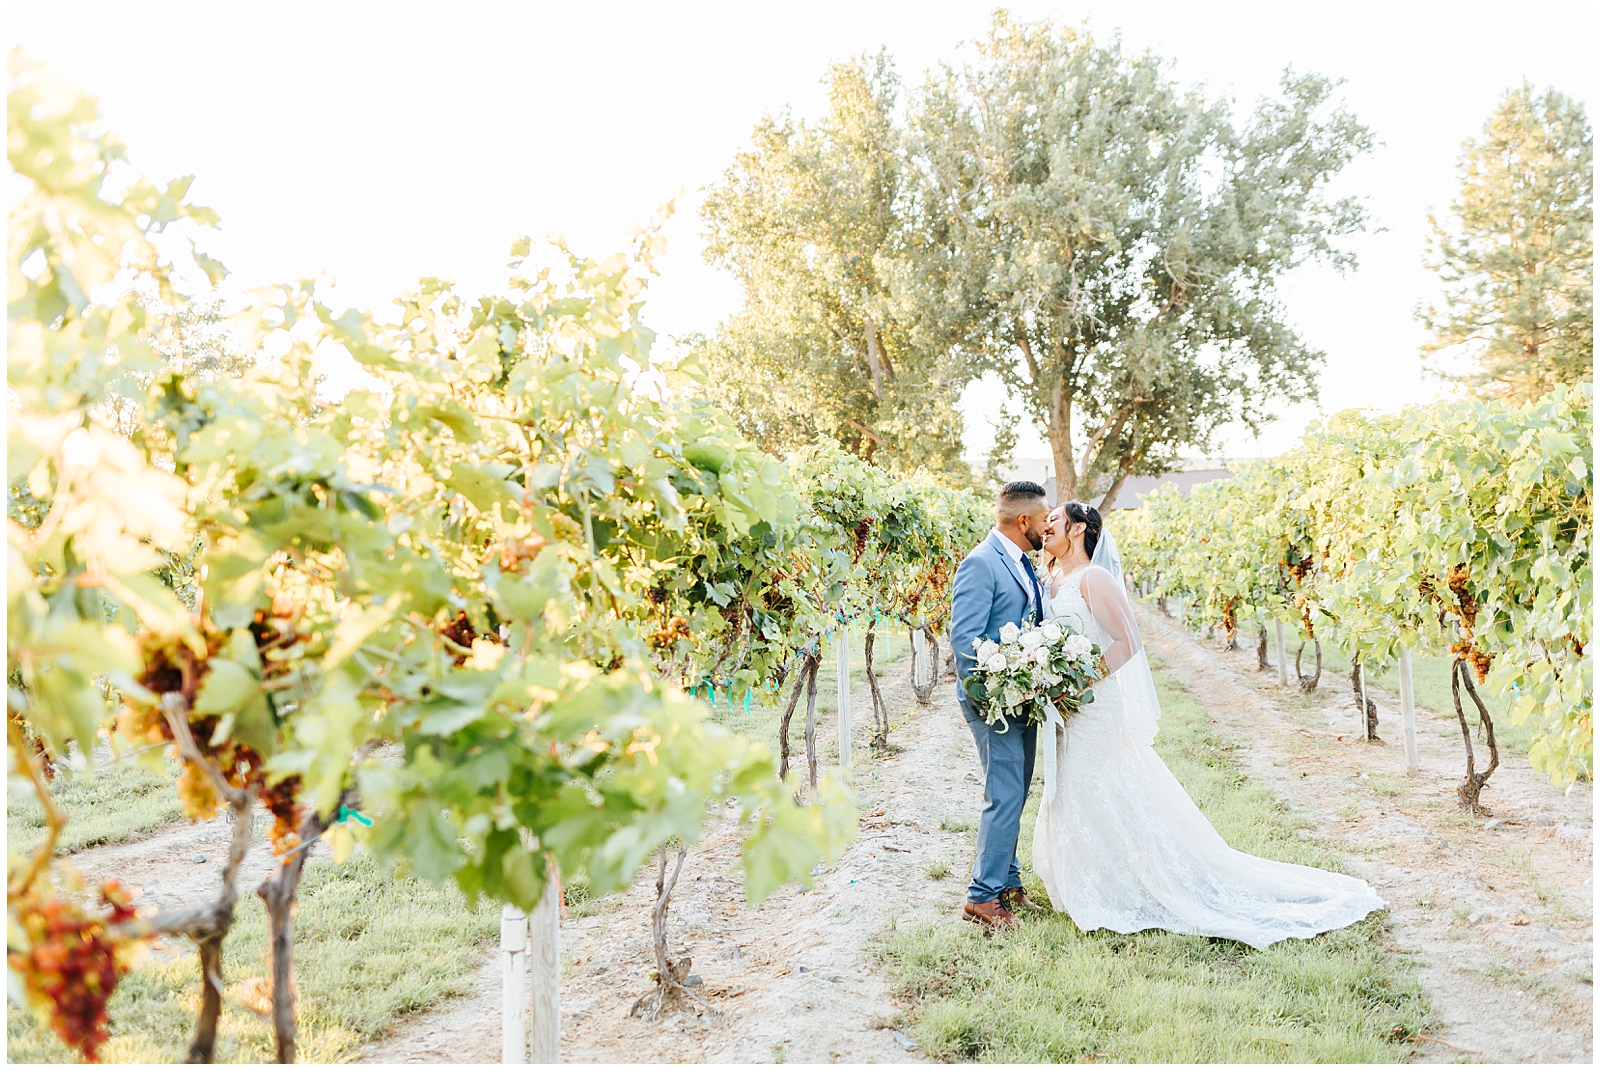 Golden Hour Portraits of the Bride and Groom in the Vineyards